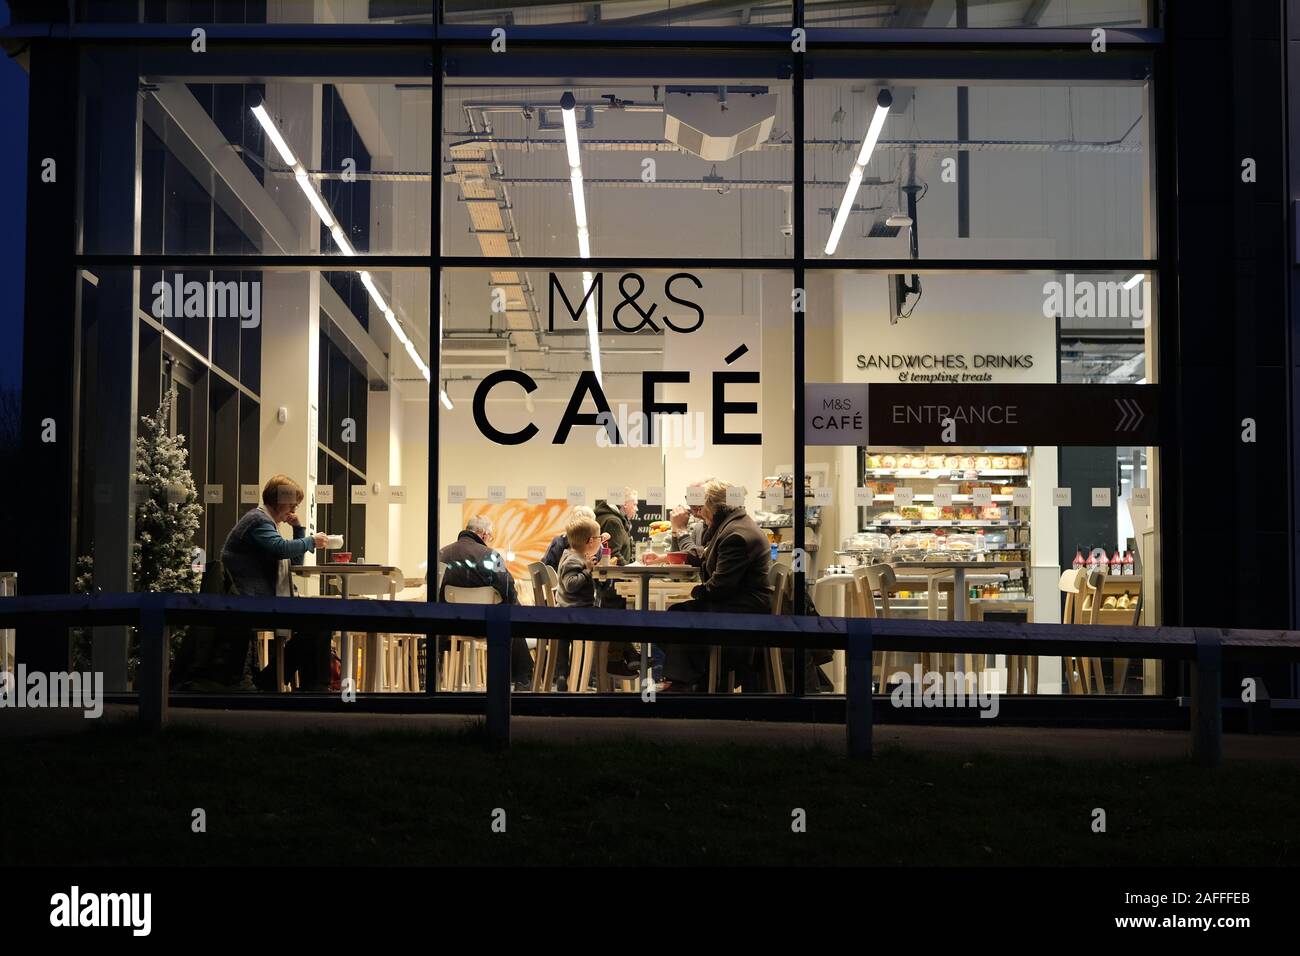 M&S Cafe with people enjoying their meals seen through the windows at night. Stock Photo